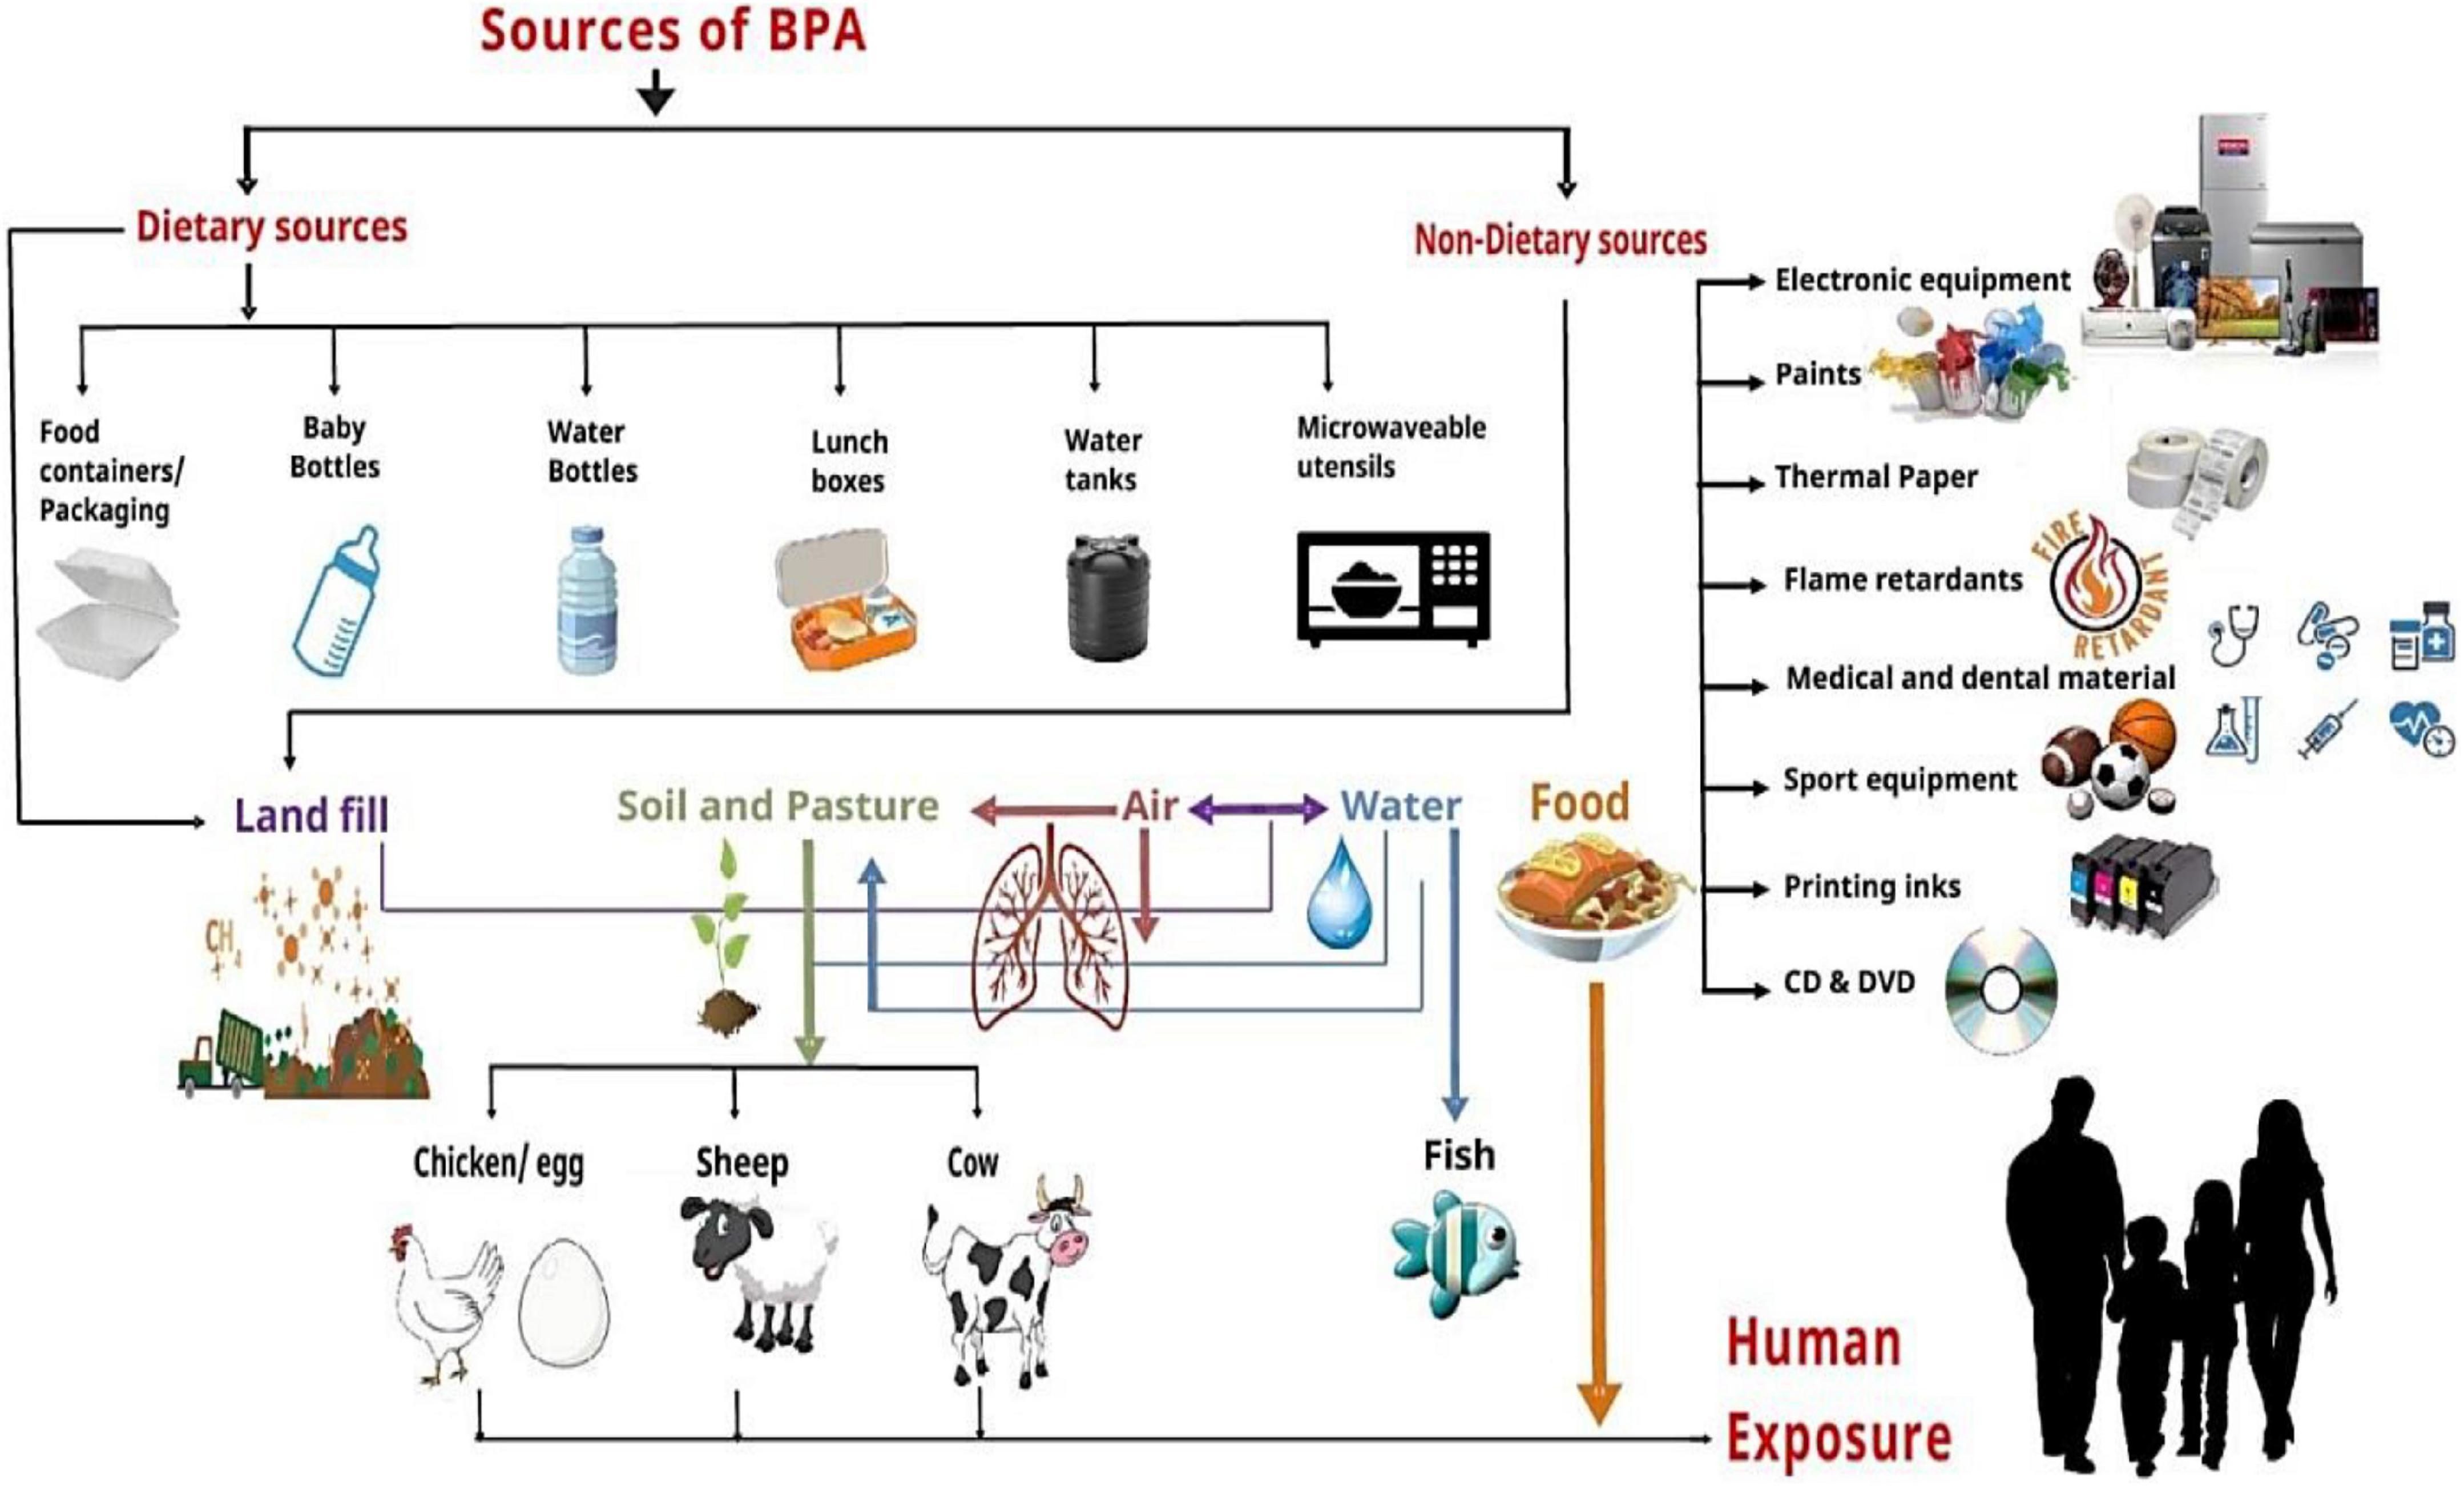 Is There BPA In Your Food? This Simple Tool Can Tell You